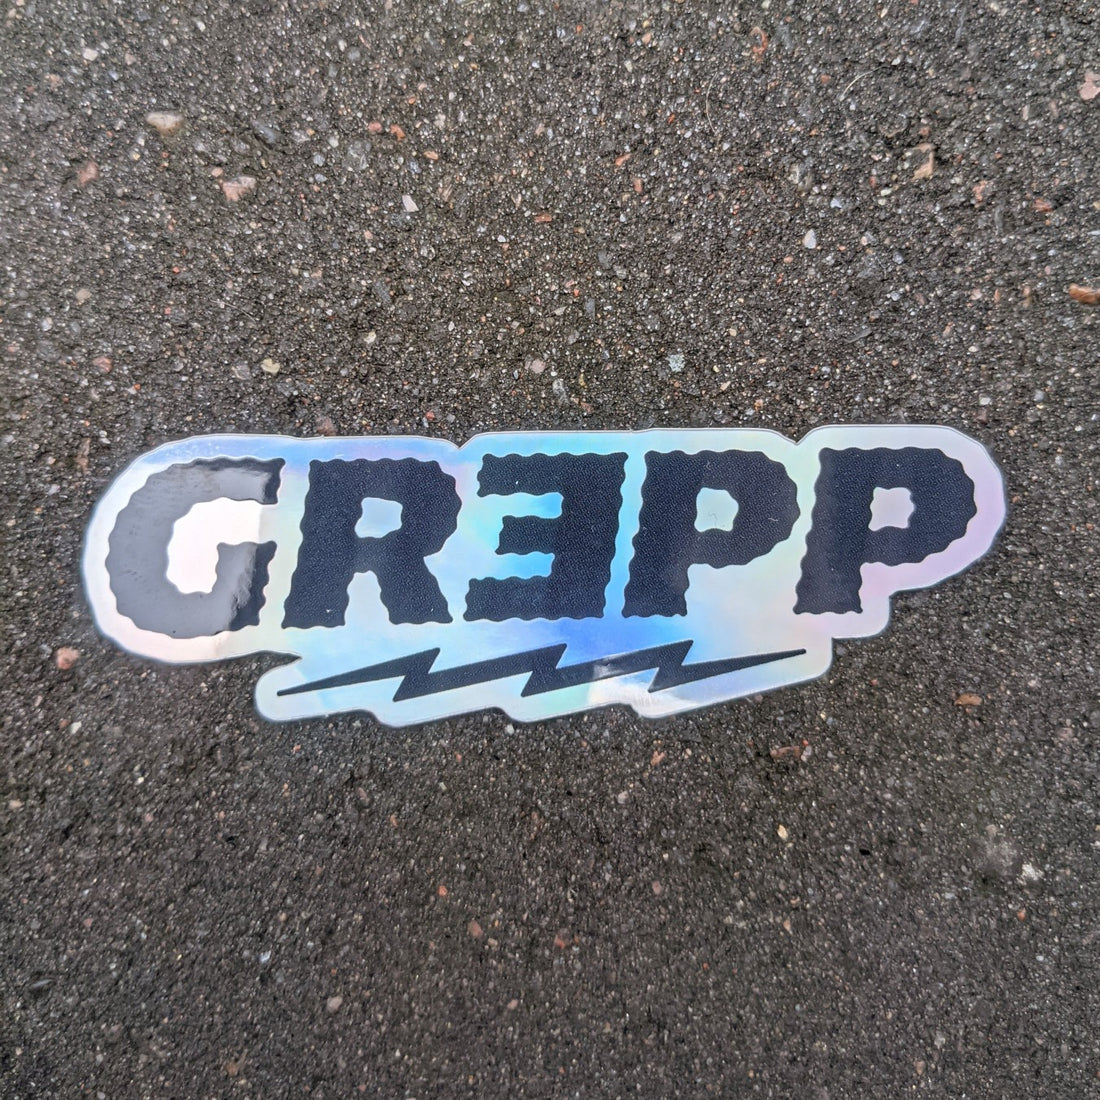 Greppers of Gaia - The Guys from GR3PP